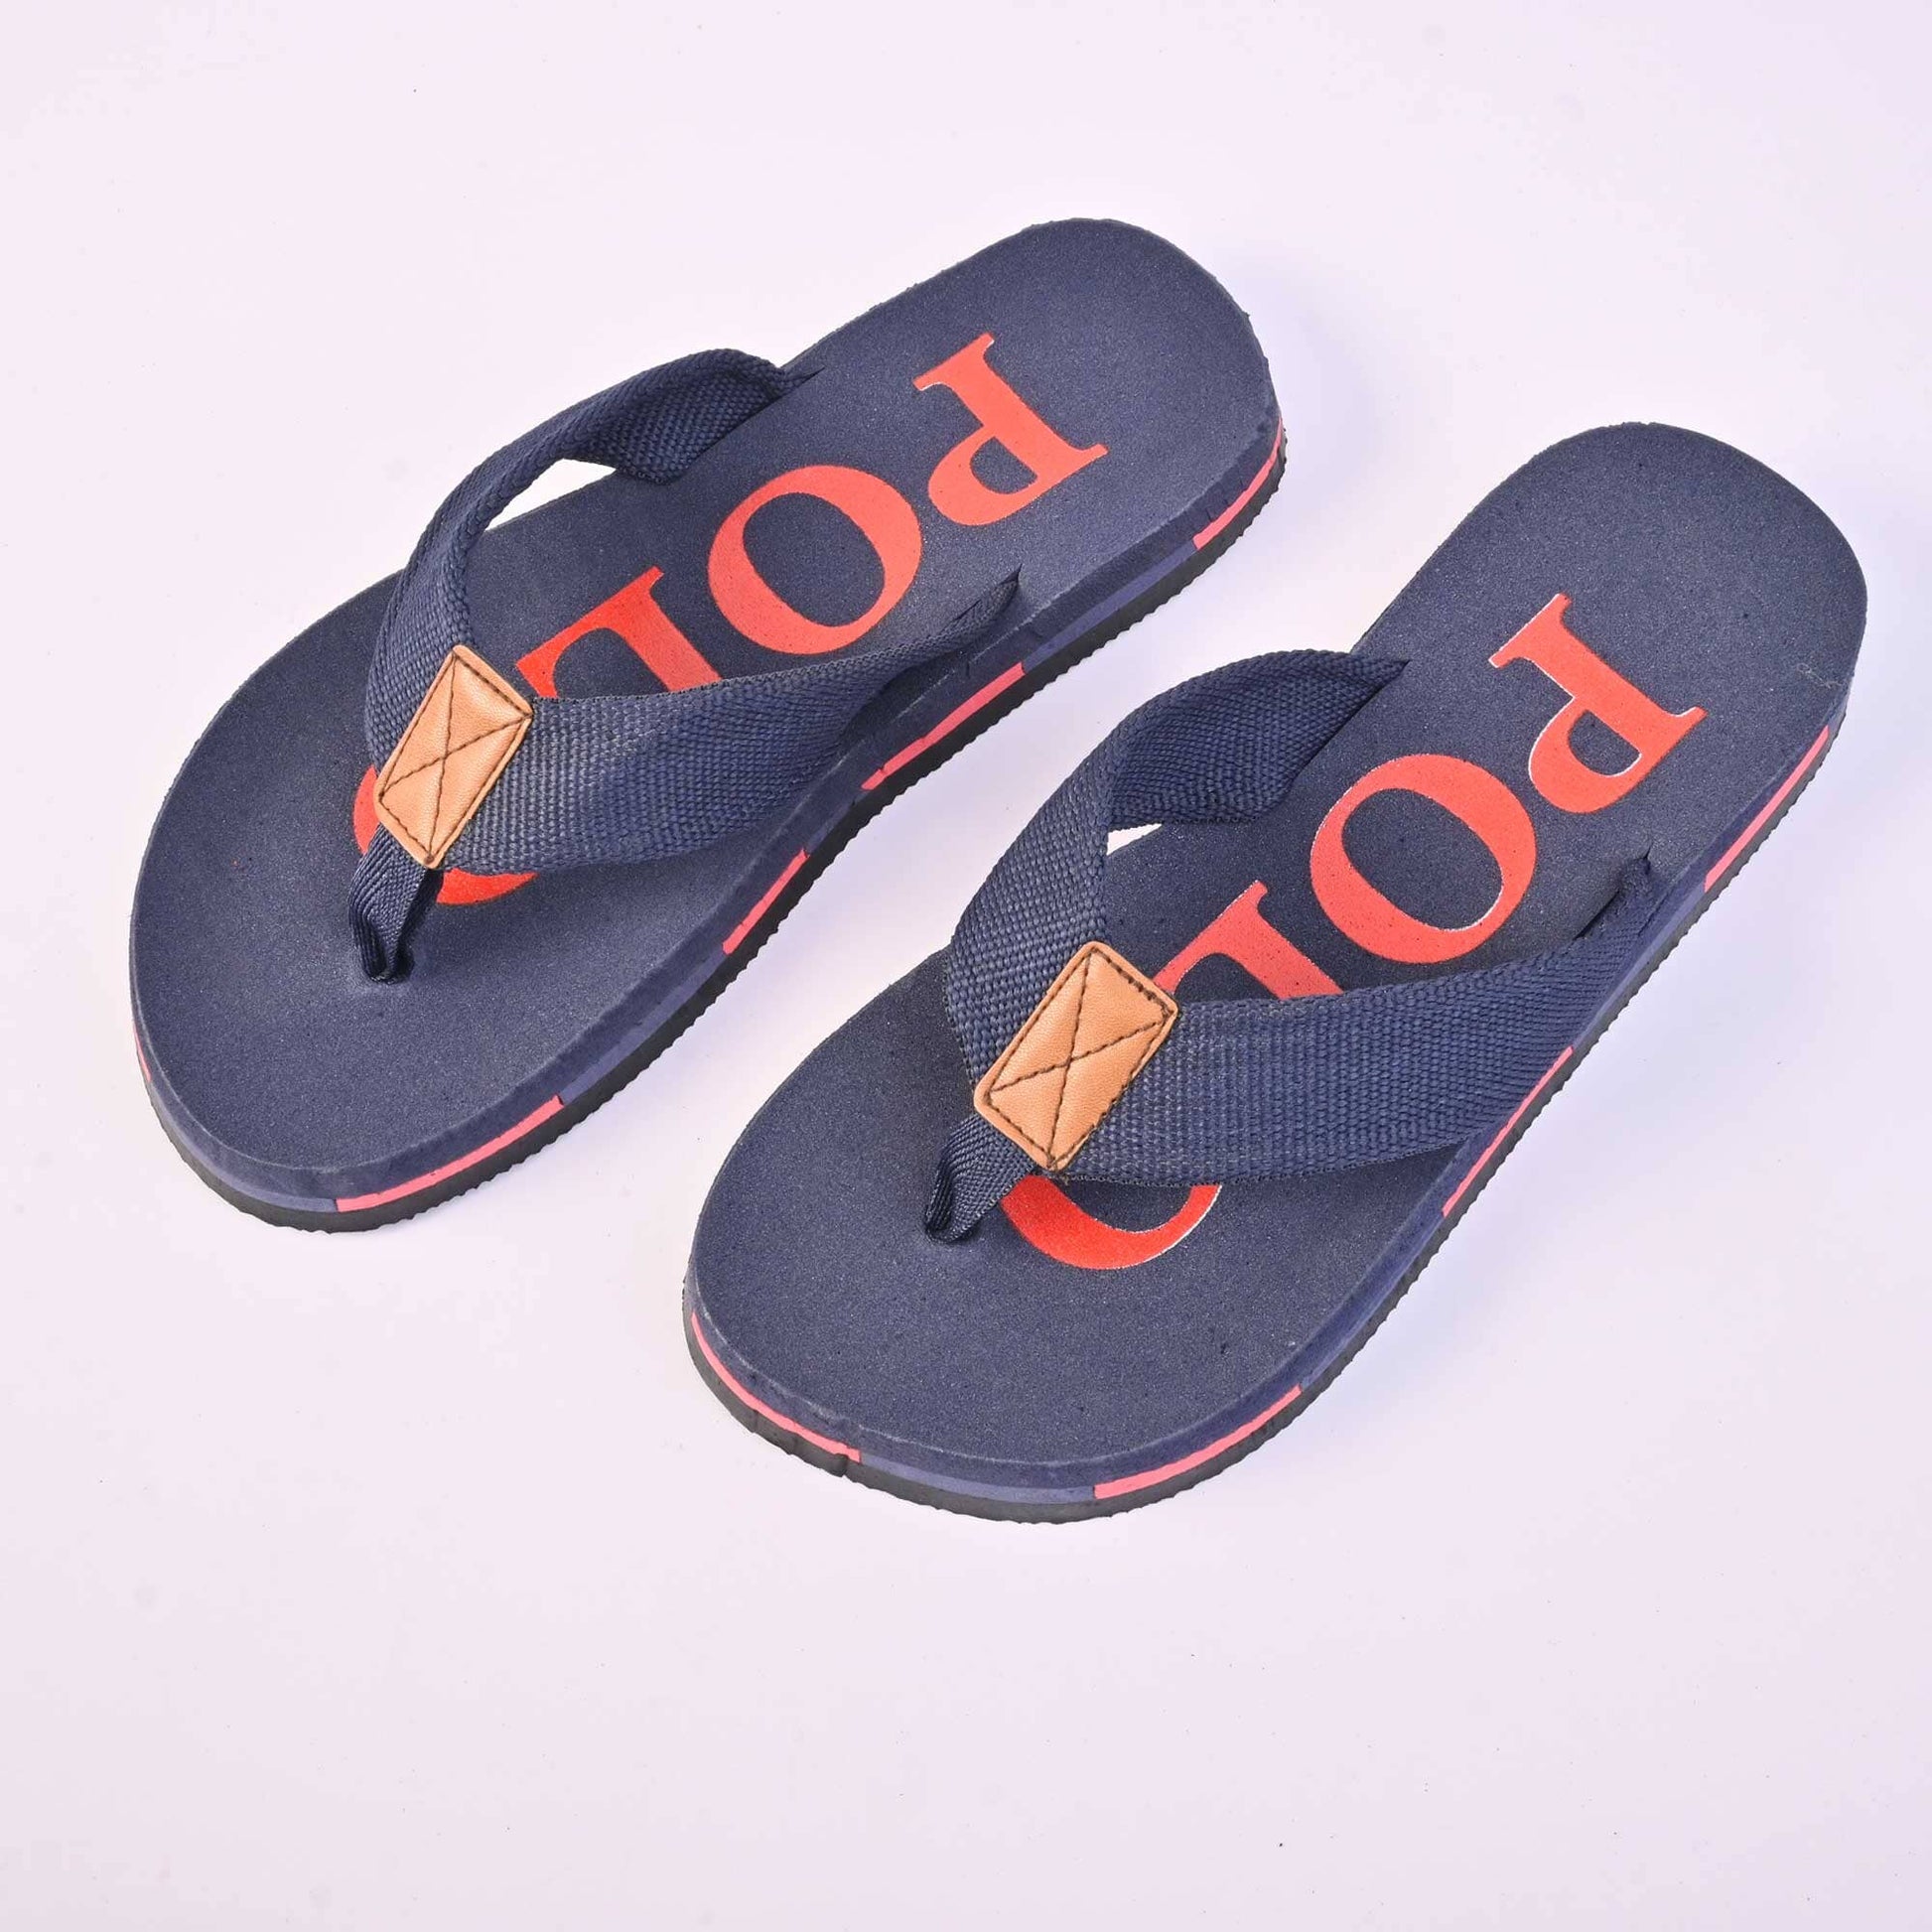 Polo Republica Men's Eindhoven Soft Flip Flops Slippers Men's Shoes Hamza Traders Navy & Red EUR 40 